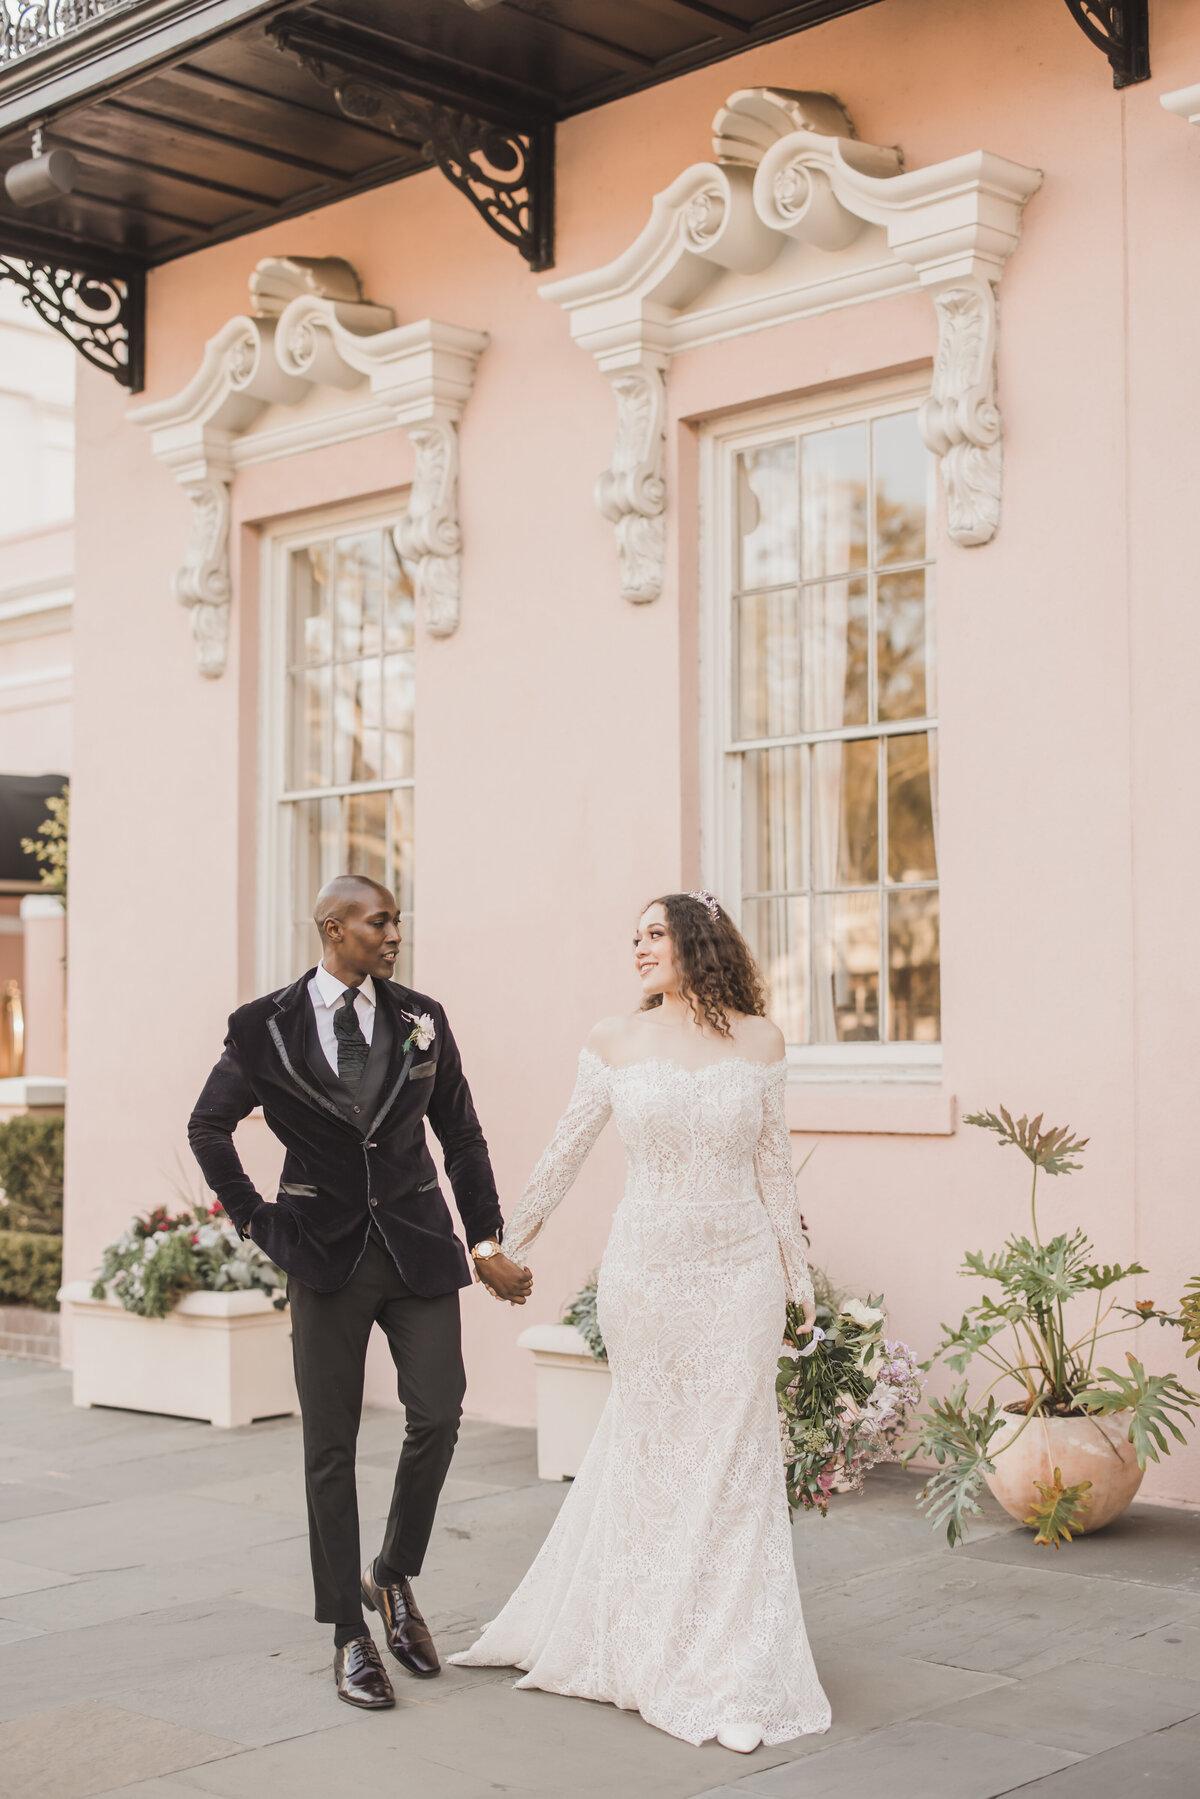 Wedding Photographer & Elopement Photographer Husband and wife hold hands outside of elegant venue